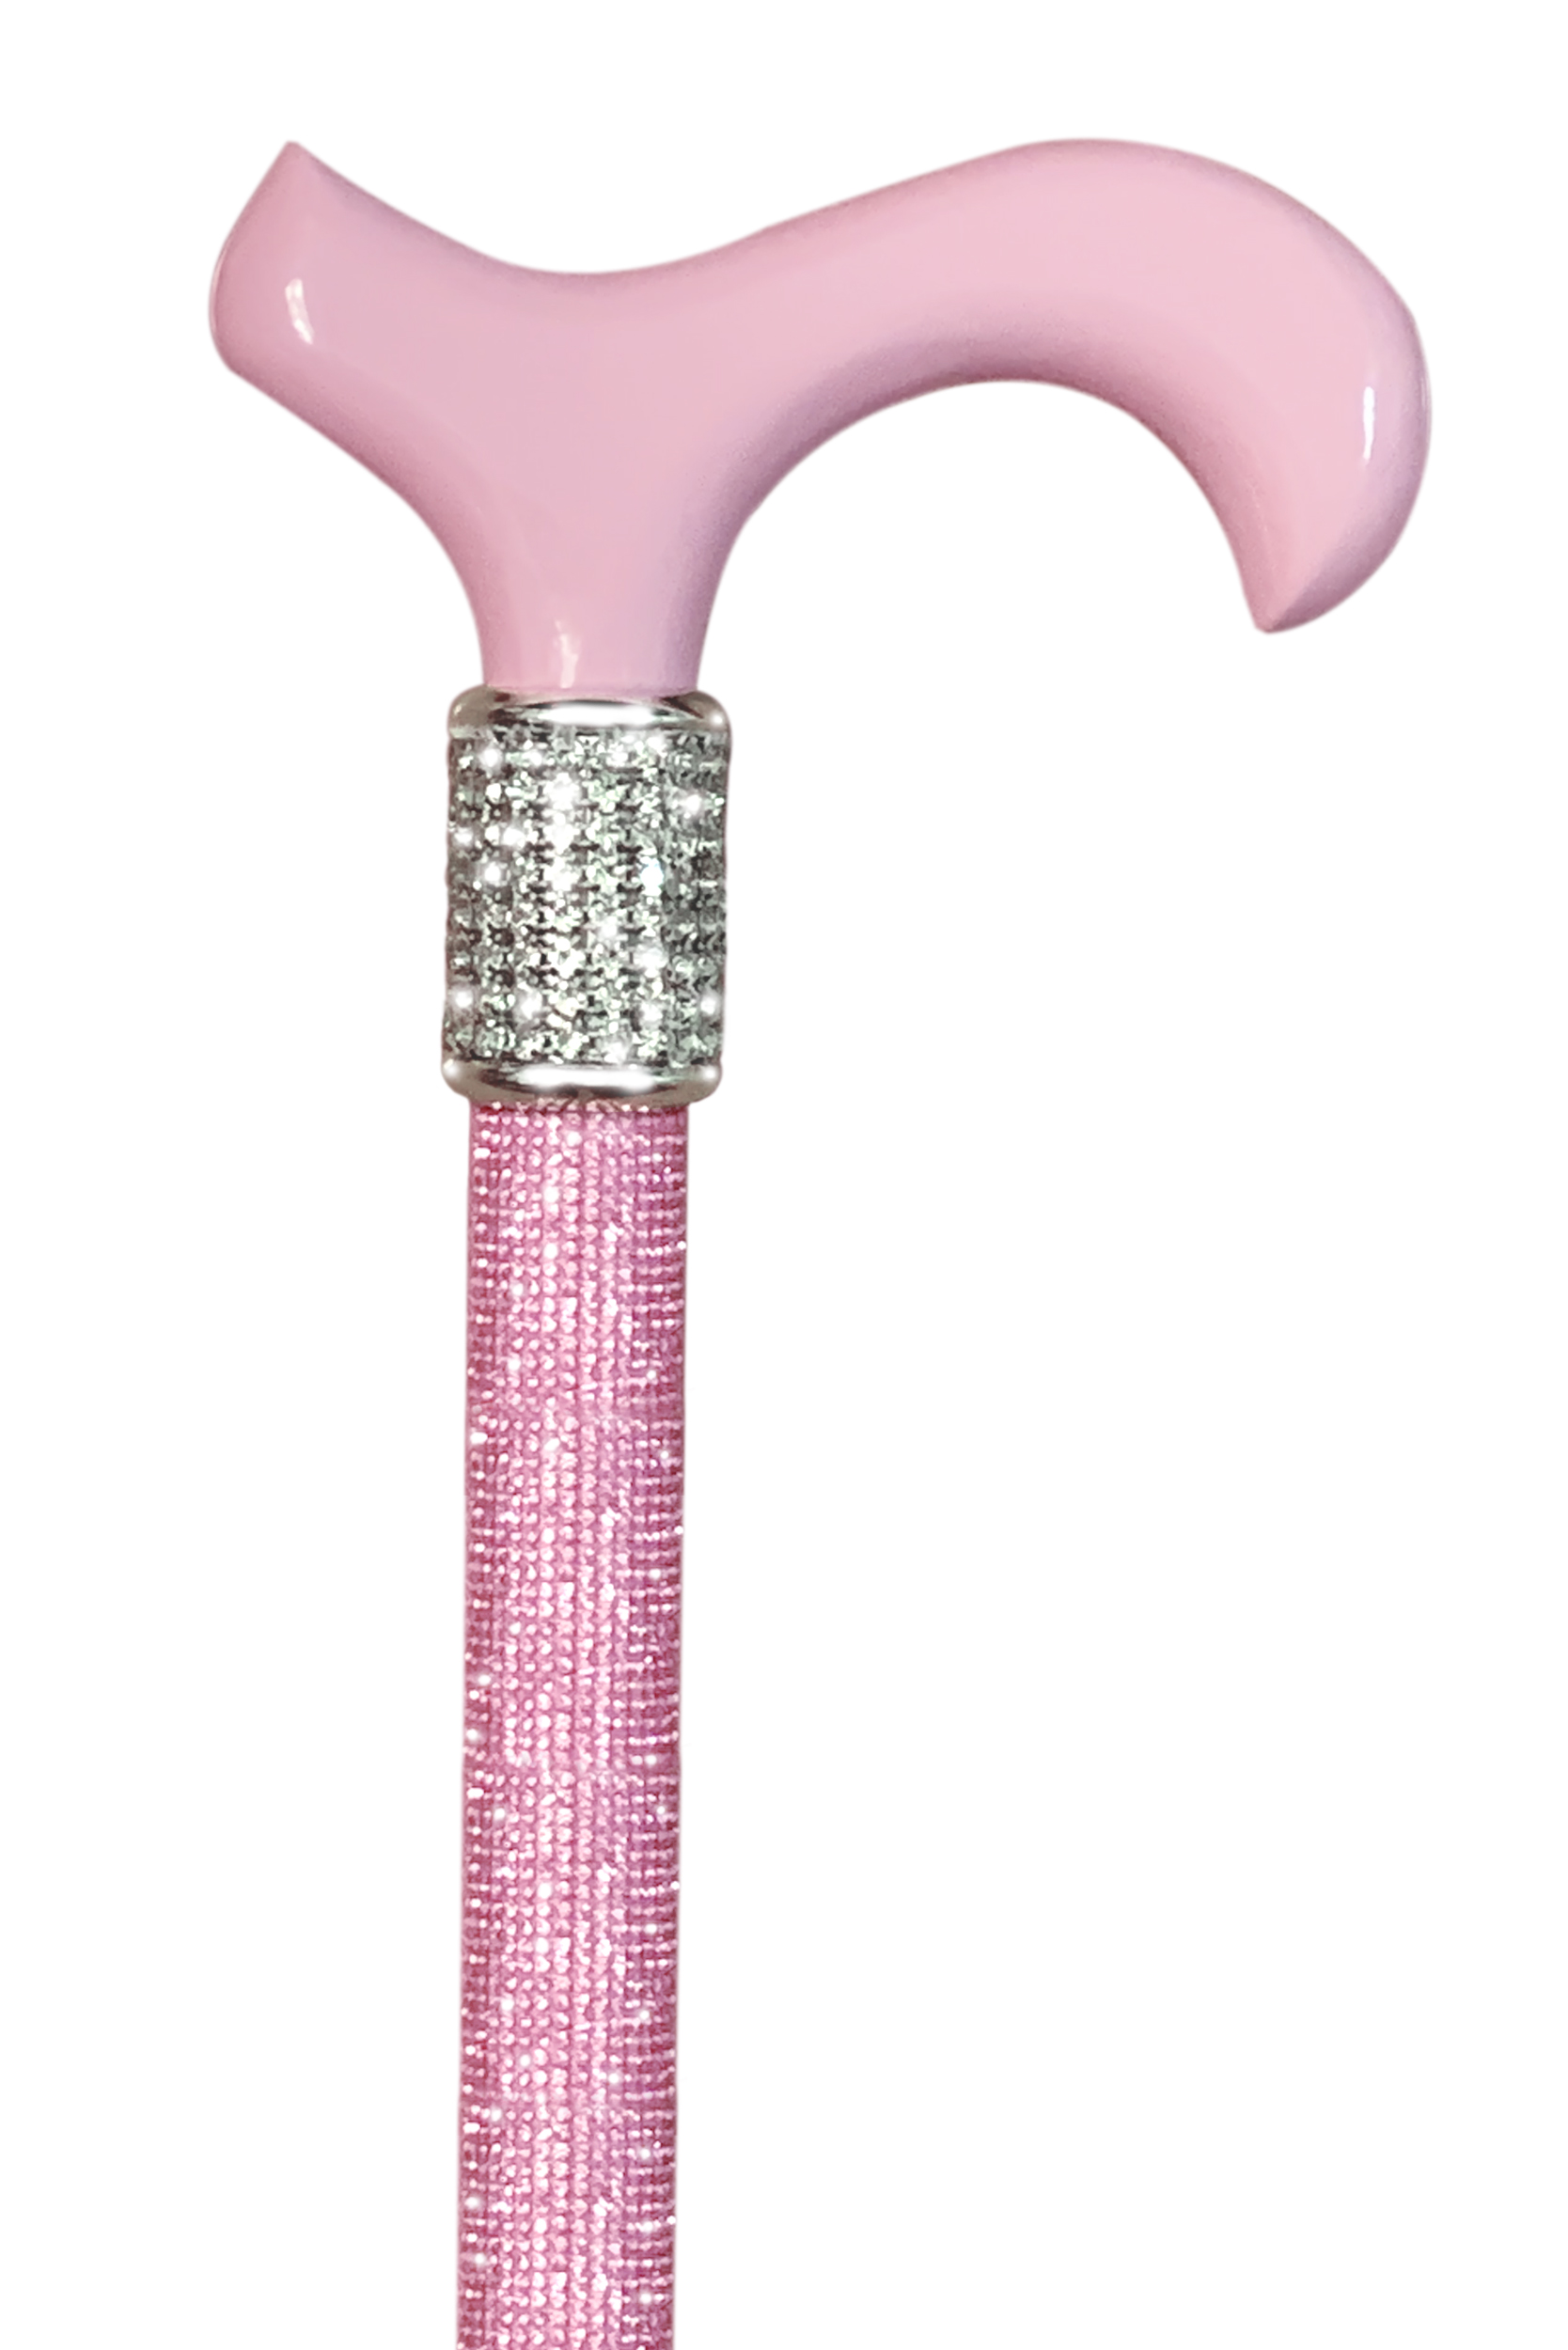 Adjustable Fashionable Pink Cane with Diamonds and Pearls